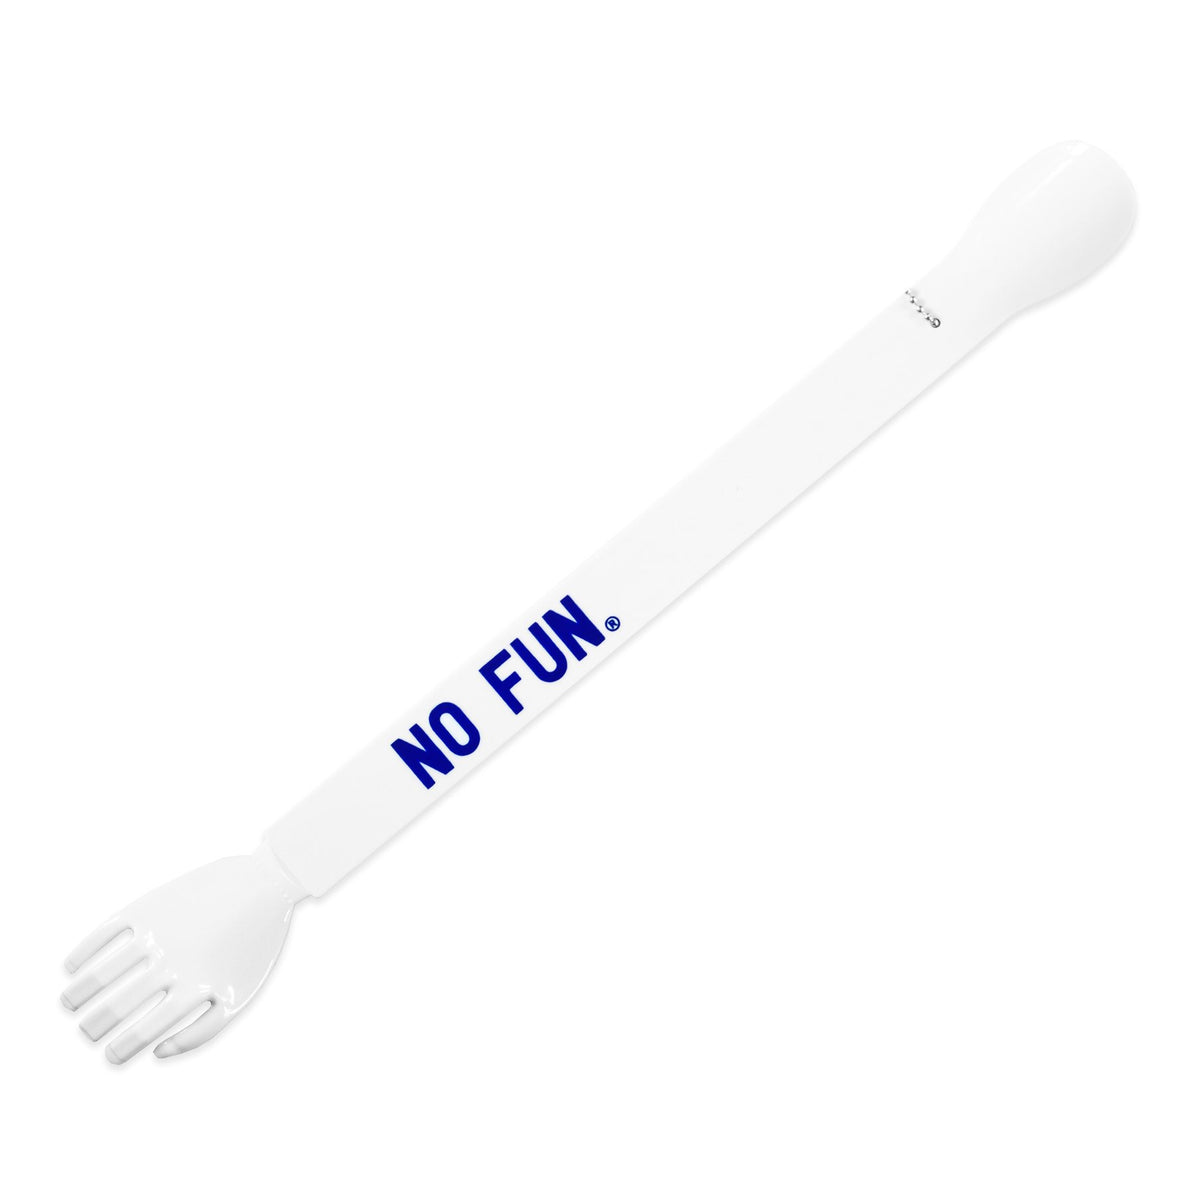 Photo of a white double ended shoe horn and back scratcher against a white background.  A blue "NO FUN®" logo is visible to the camera, as well as a chain to hang the item.